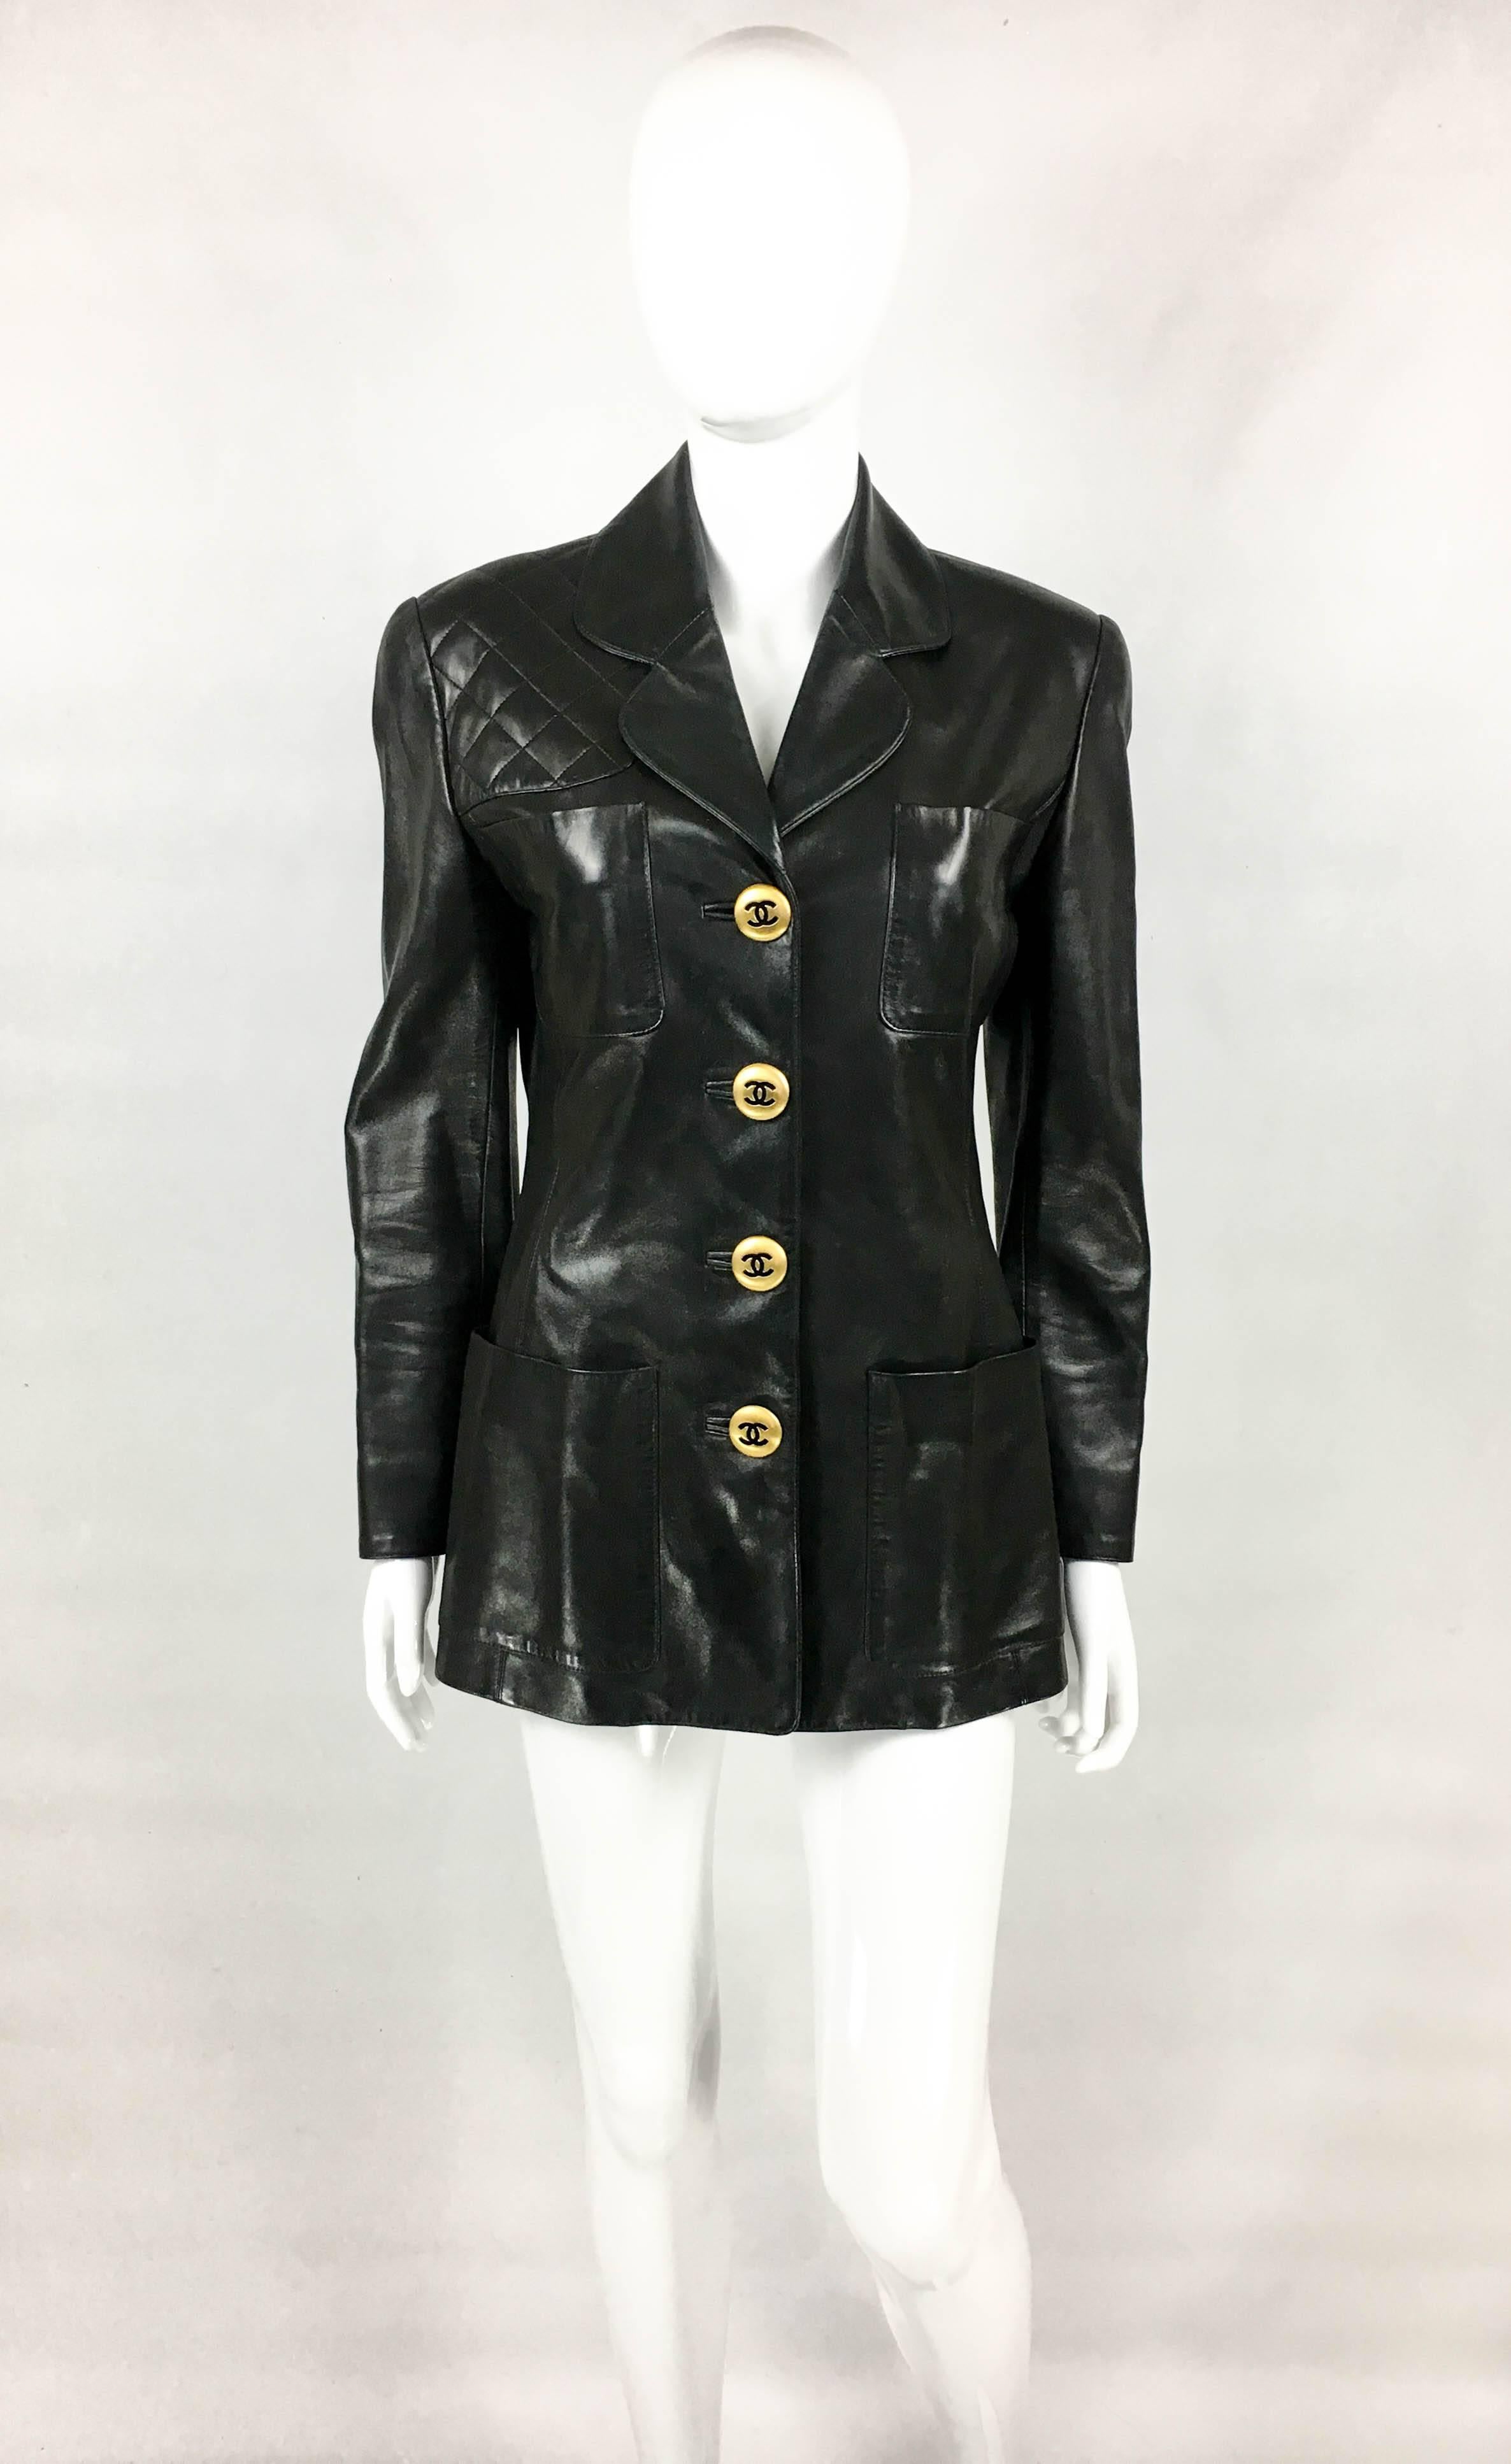 Stunning Vintage Chanel Black Leather Jacket. This amazing piece was designed for the 1992 Fall / Winter runway show (refer to photos). Crafted in soft black leather, it features 4 front pockets (2 breast pockets and 2 larger ones at hip level) and